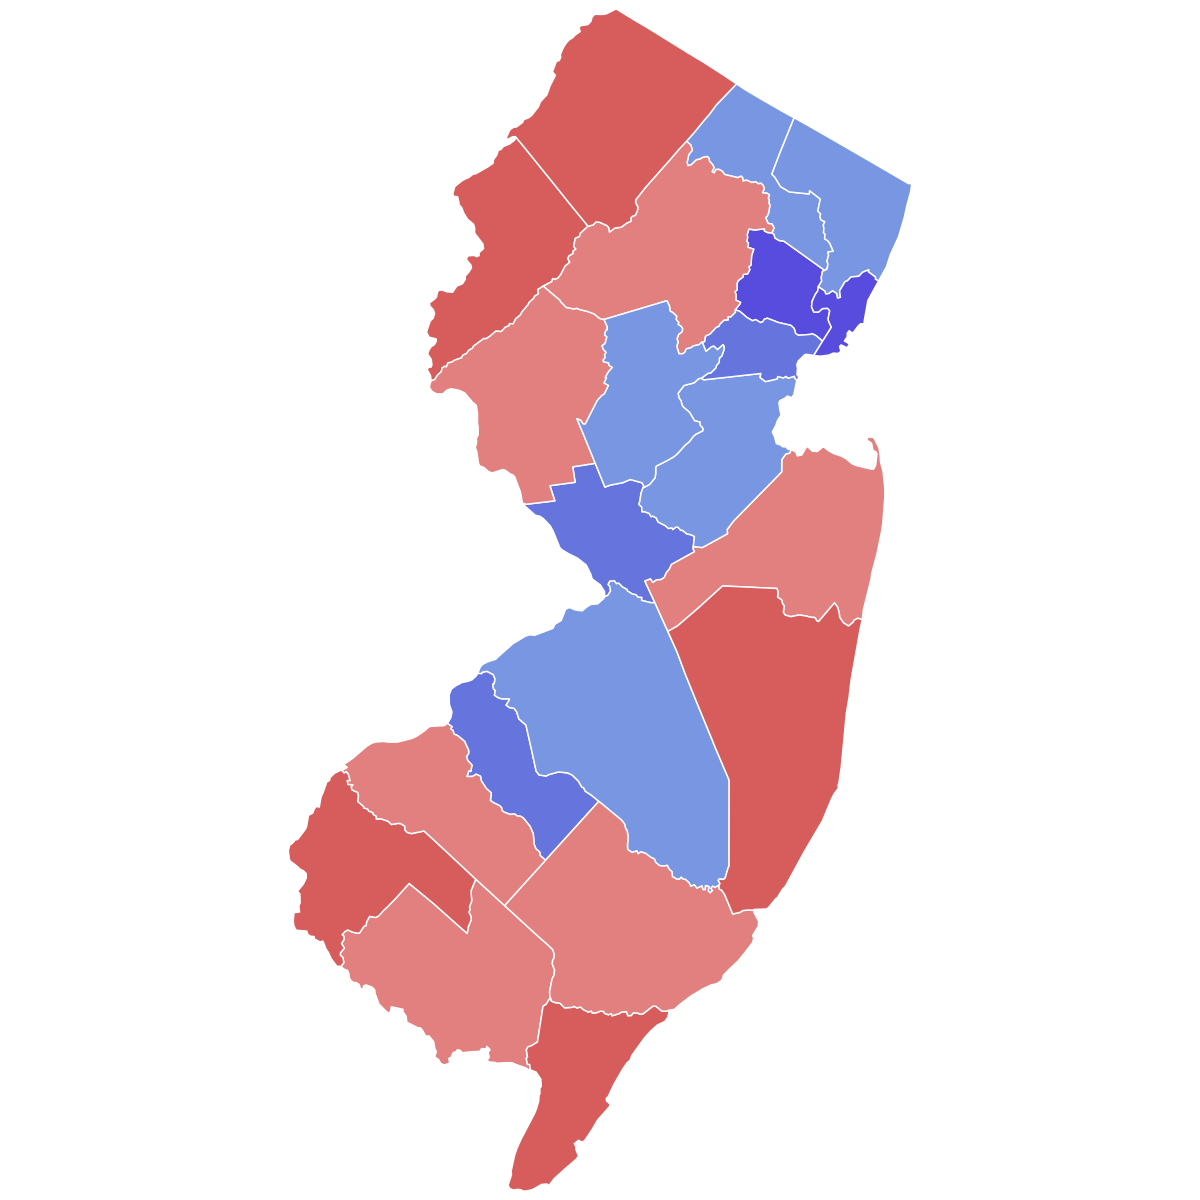 New Jersey is considered a stronghold of the Democratic Party and has supported the Democratic candidate in every presidential election since 1992.